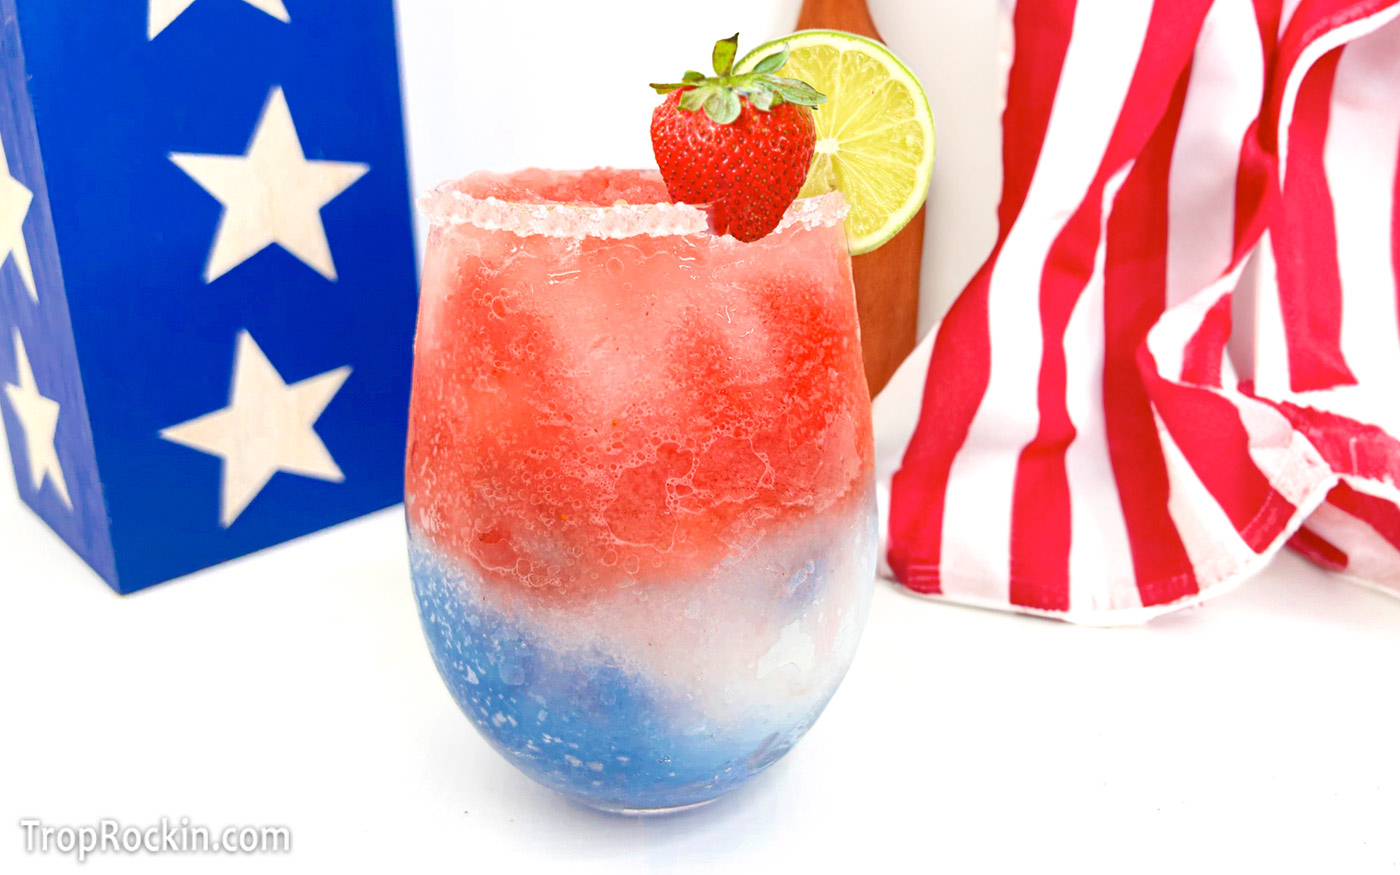 Red white and blue margarita garnished with a strawberry and lime wheel.